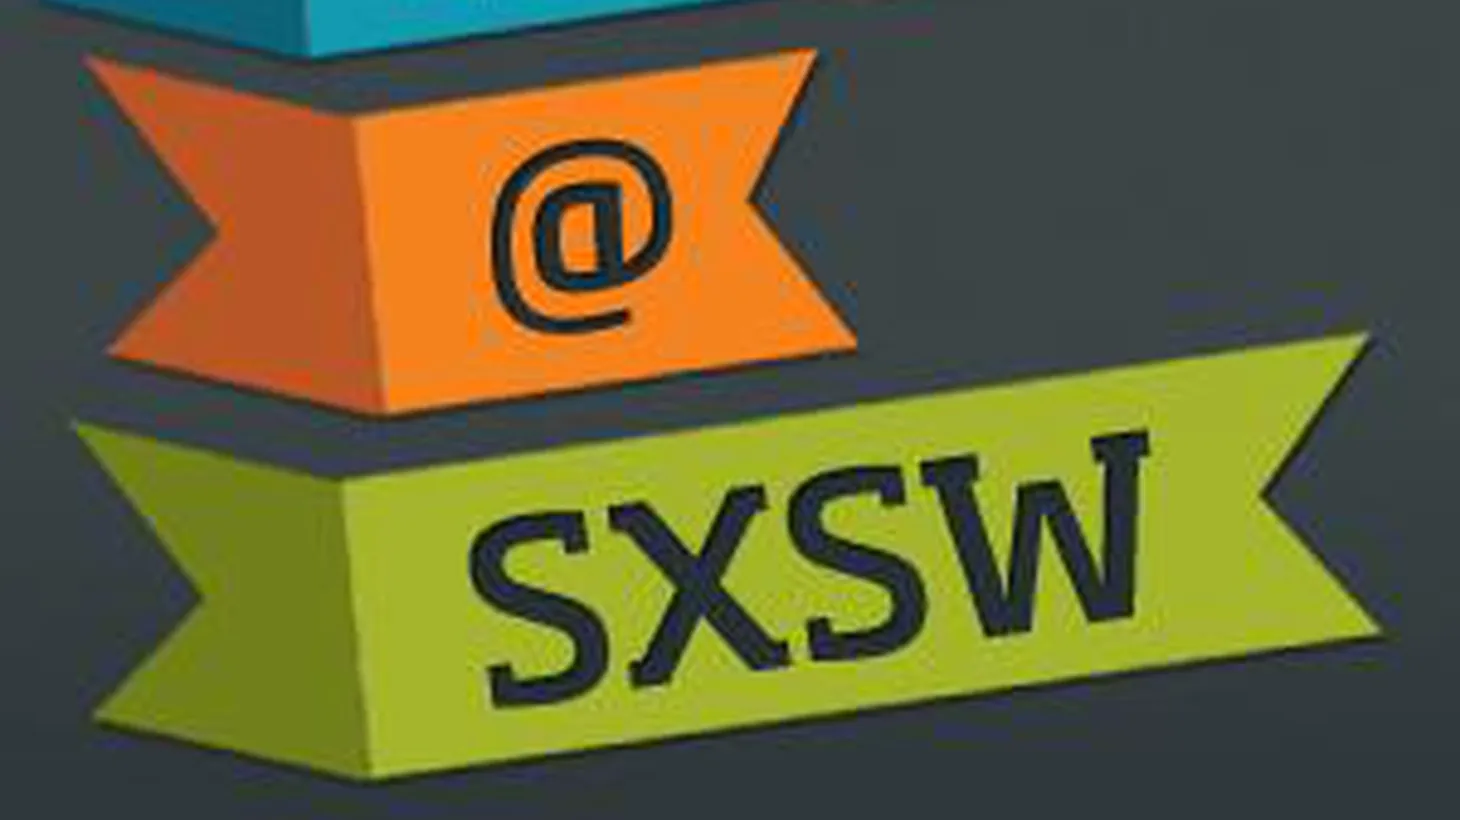 Thousands of bands from across the globe scatter over 80 stages in Austin, TX and KCRW is there to capture the Sights and Sounds. Join Morning Becomes Eclectic host Jason Bentley, along with his Southby cohort, Anne Litt as they hit the streets with microphones, capturing interview with folks the likes of Liz Lambert, the "unofficial mayor" of Austin, Terry Lickona the producer of Austin City Limits, and tons of artists, food vendors, pedi-cab drivers and the many personalities of Sixth Street.